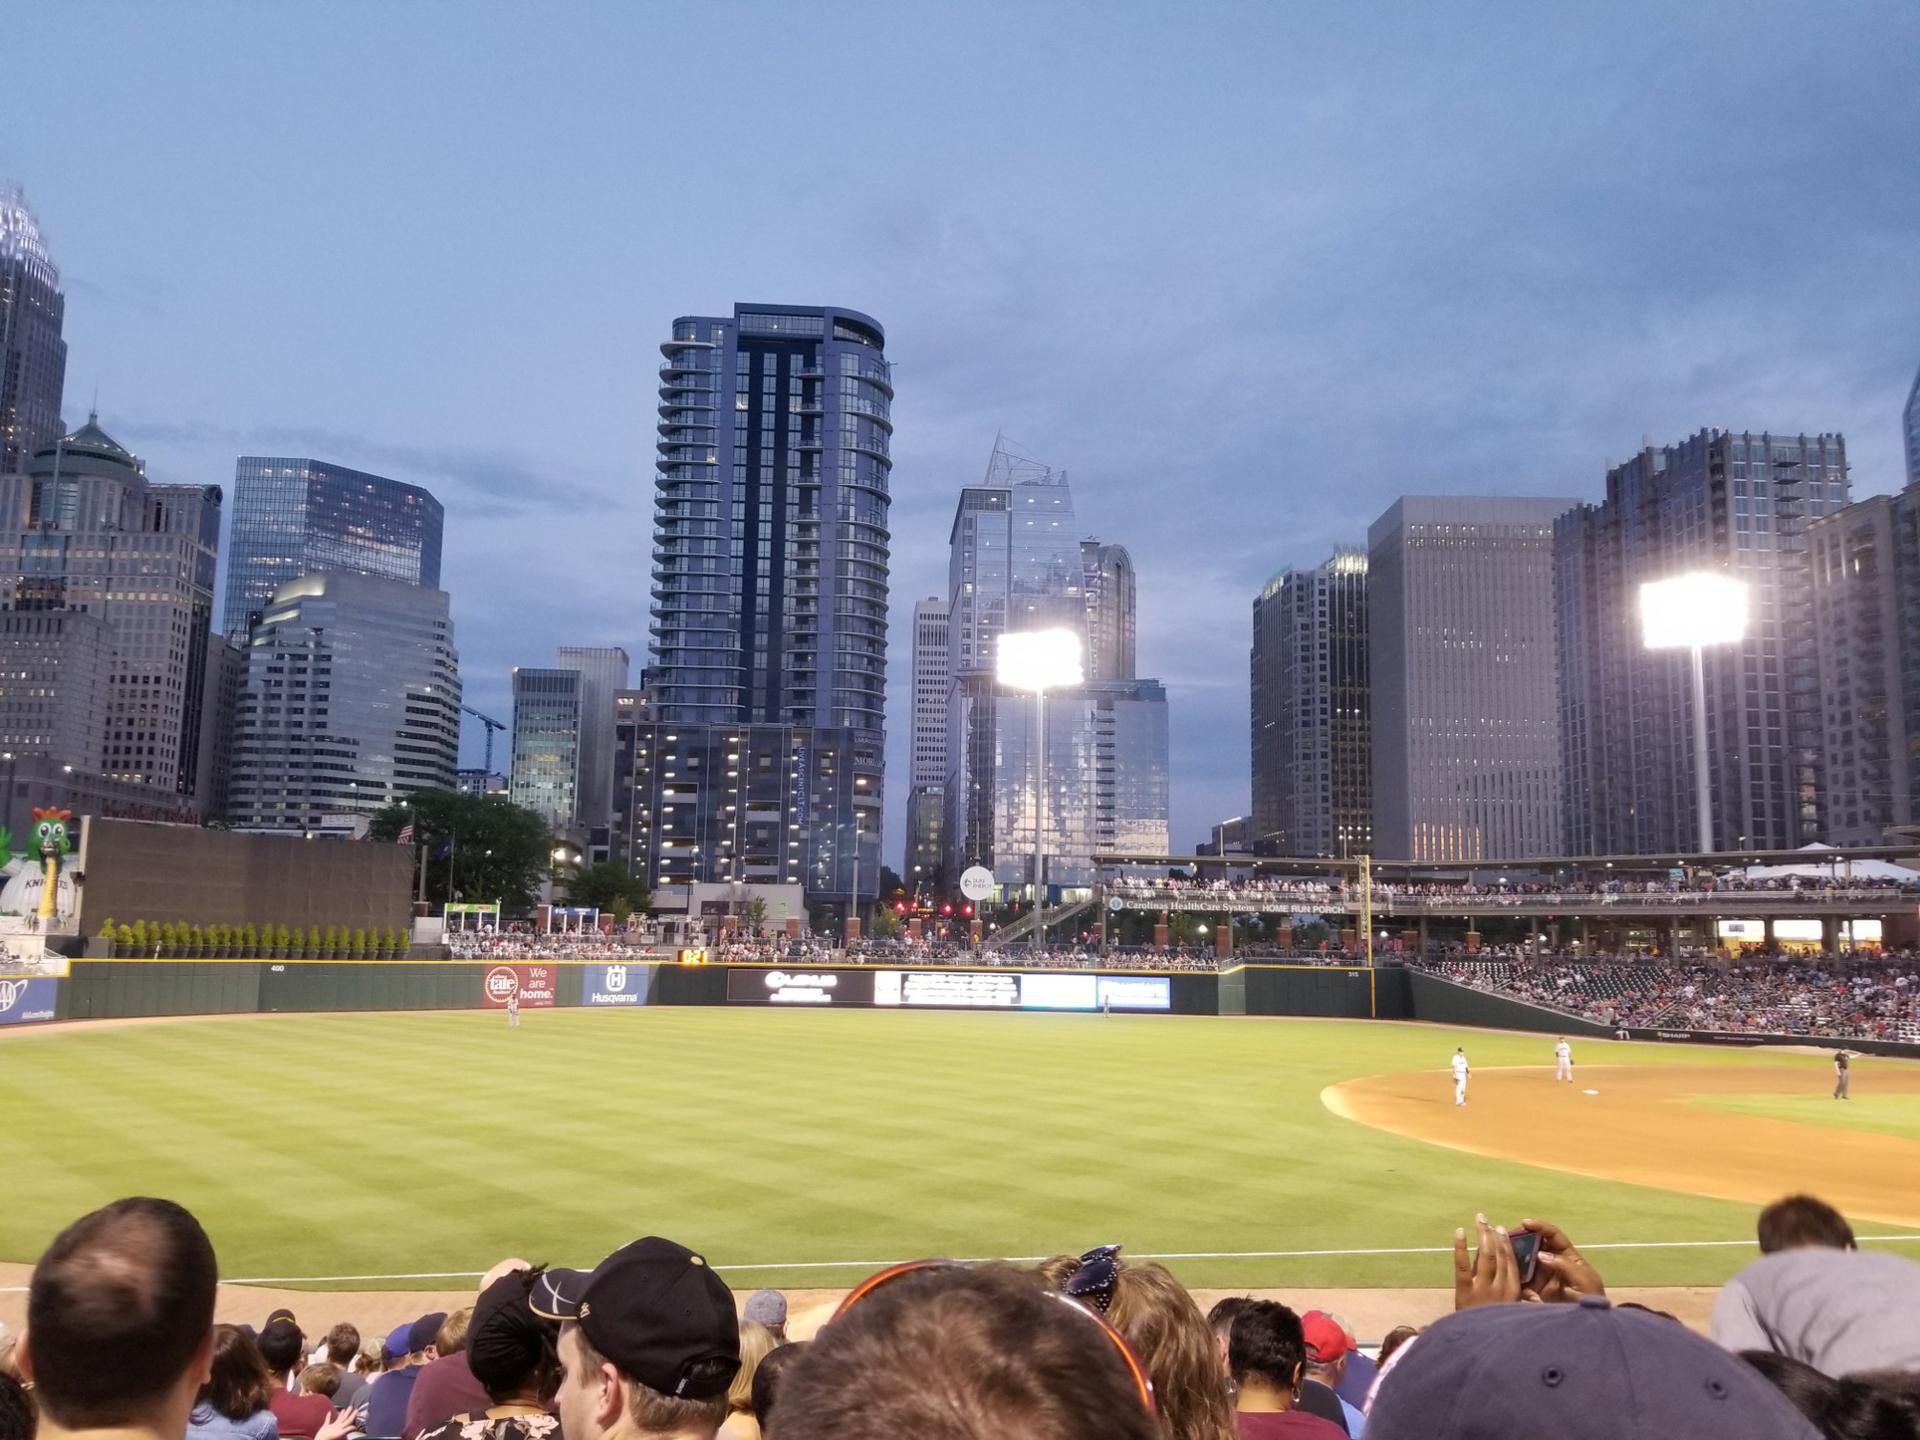 Truist Field, home of the Charlotte Knights